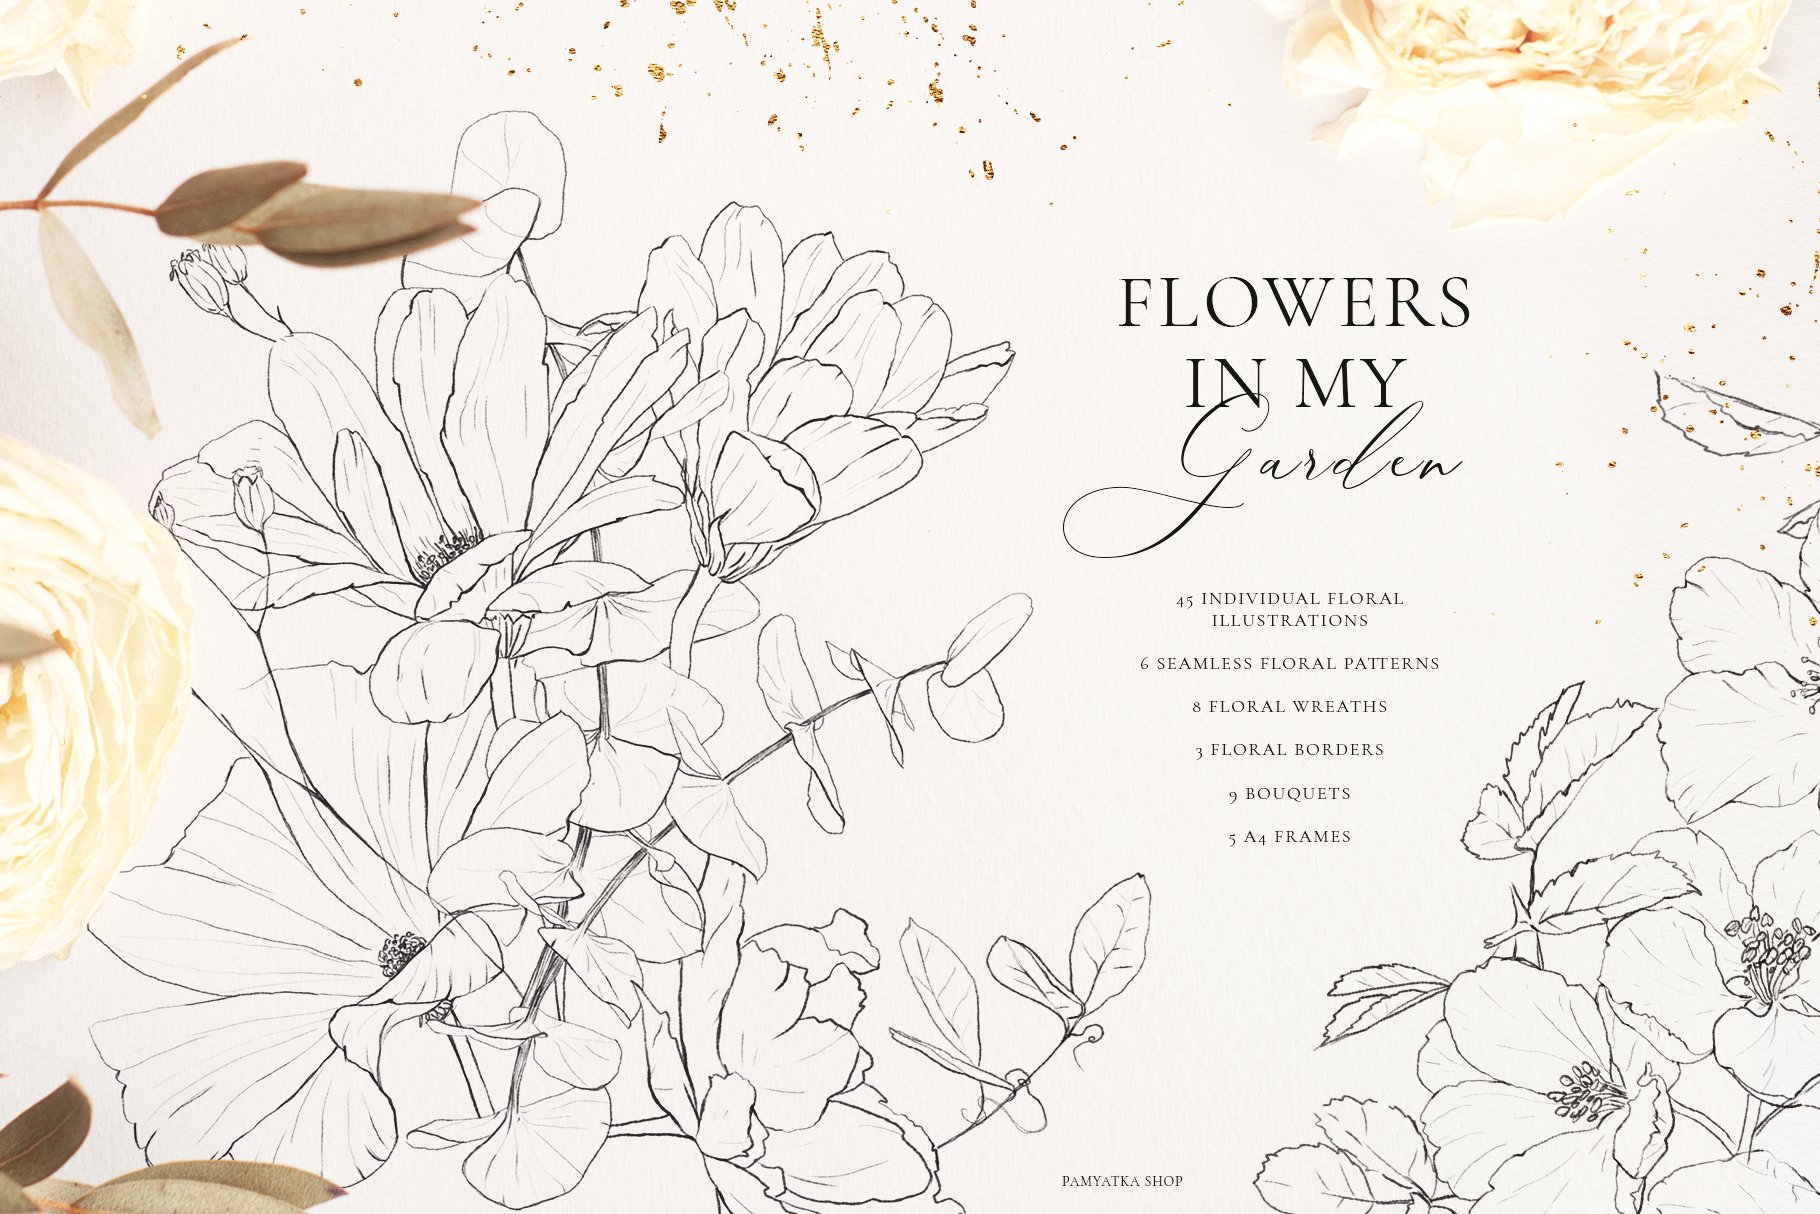 Wildflowers-Pencil sketch collection cover image.